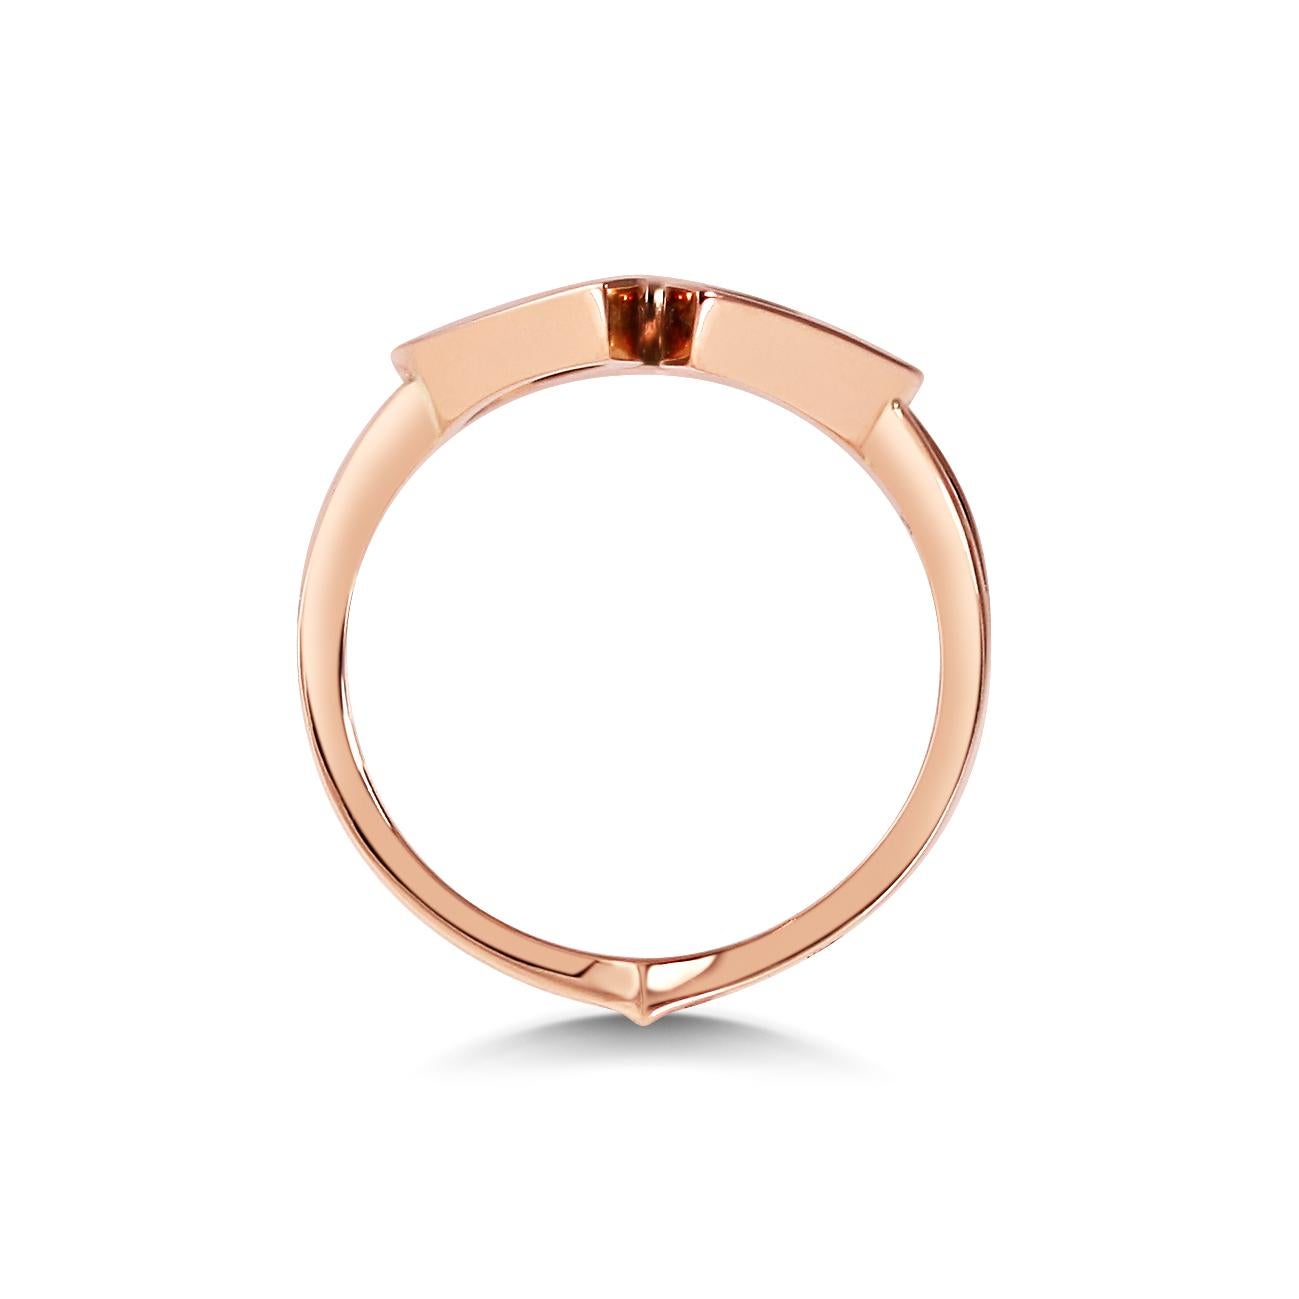 A symbol of strength and beauty, the Kali ring embodies the feminine and the fierce.
A sculptural, shaped statement ring ready to help you take on the world.

This Kali Ring is priced here in 18K Rose Gold but is also available in 9K Rose Gold.